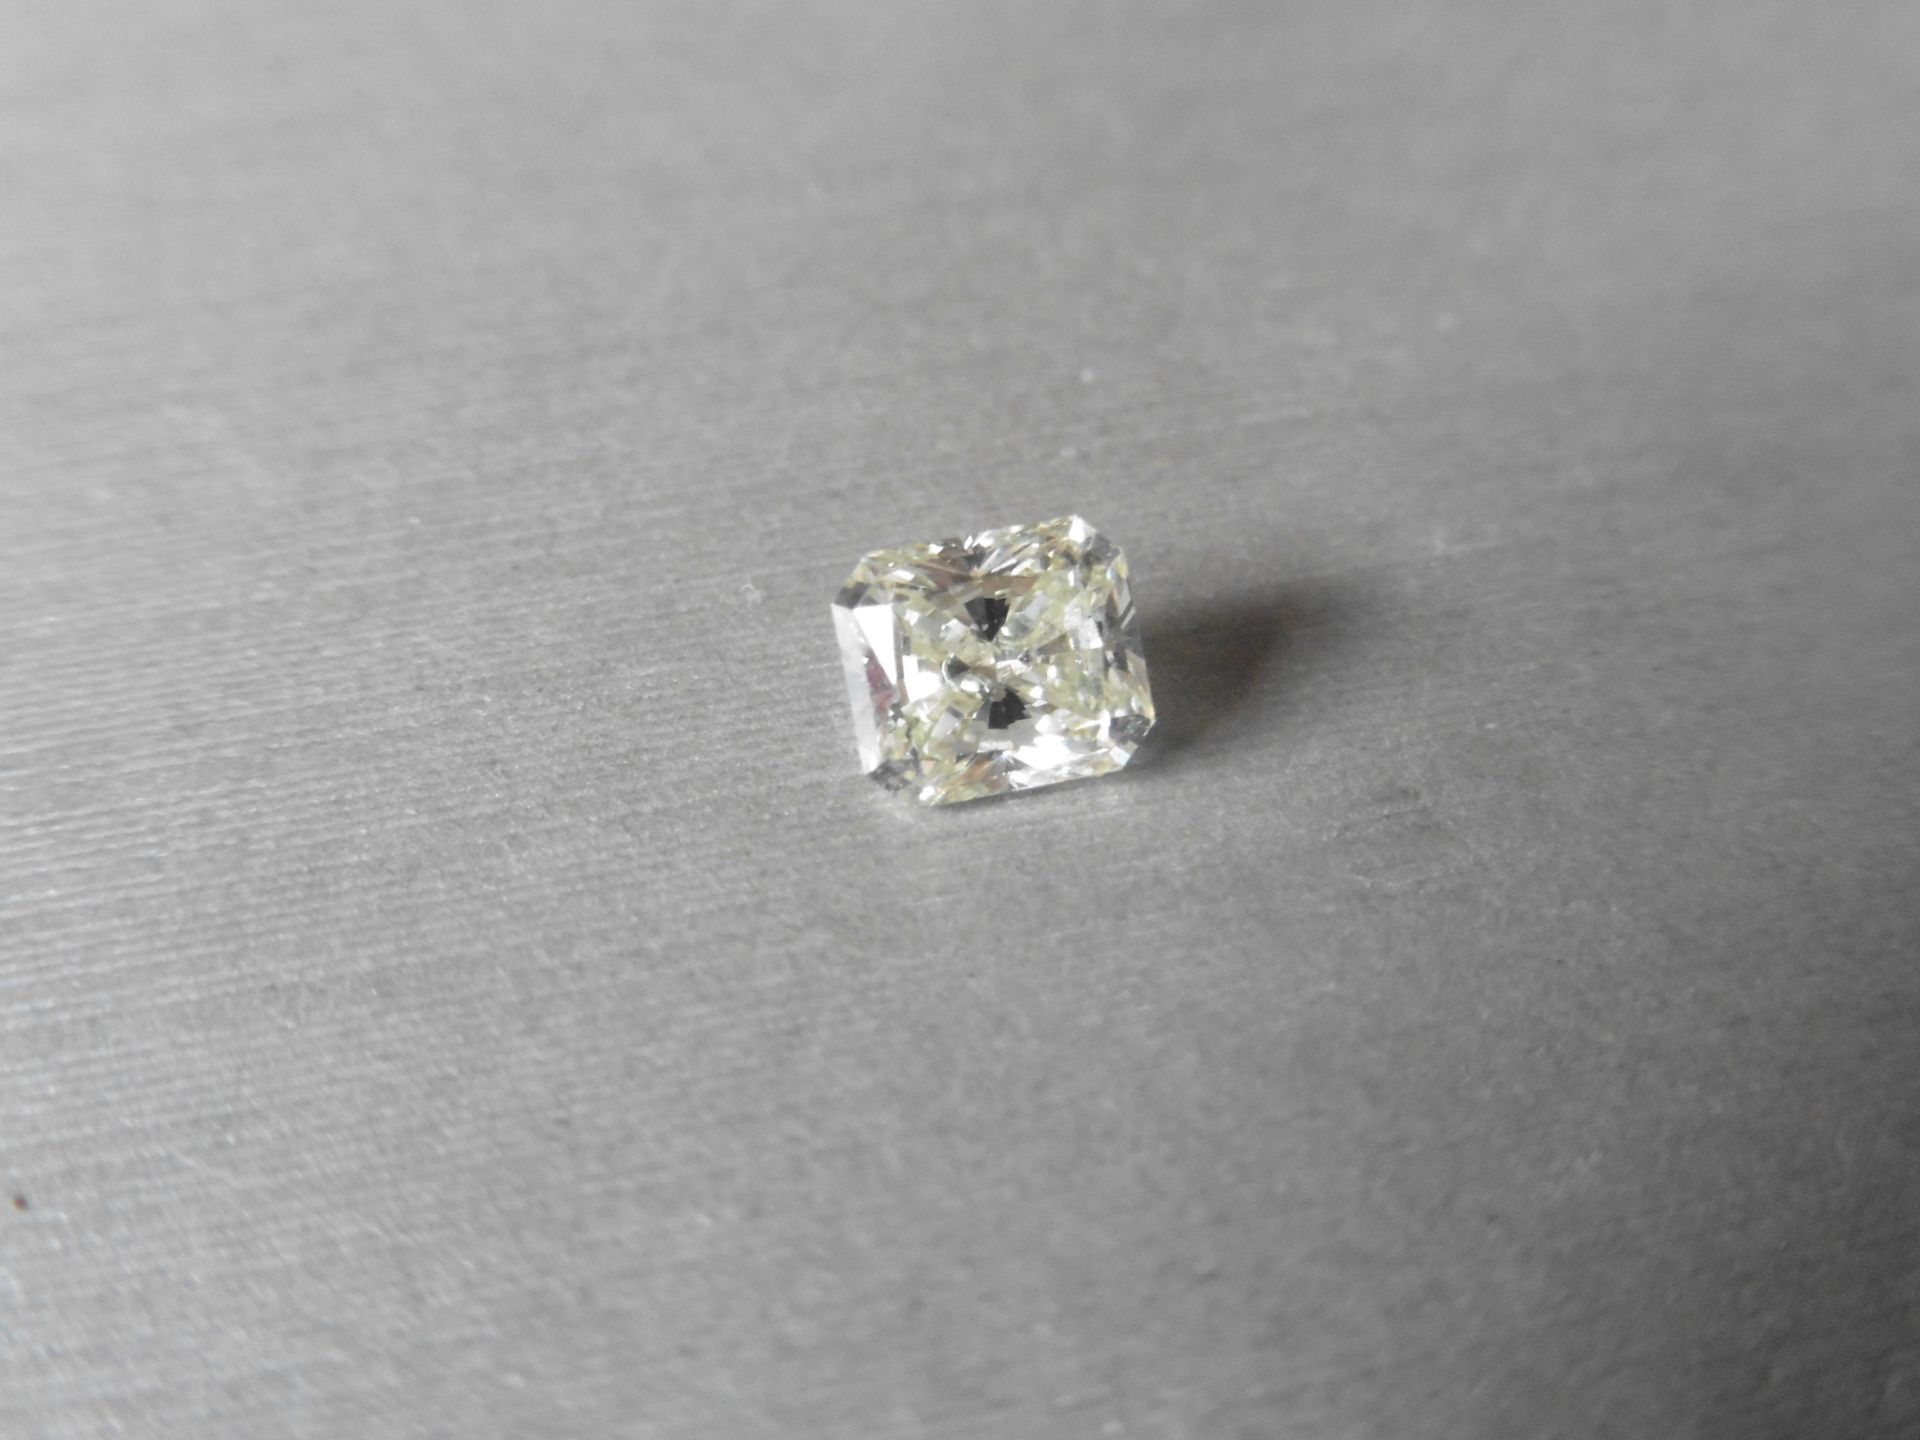 1.03ct loose radiant cut diamond. K colour and VS2 clarity. 6.09 x 5.28 x 3.65mm - Image 4 of 4